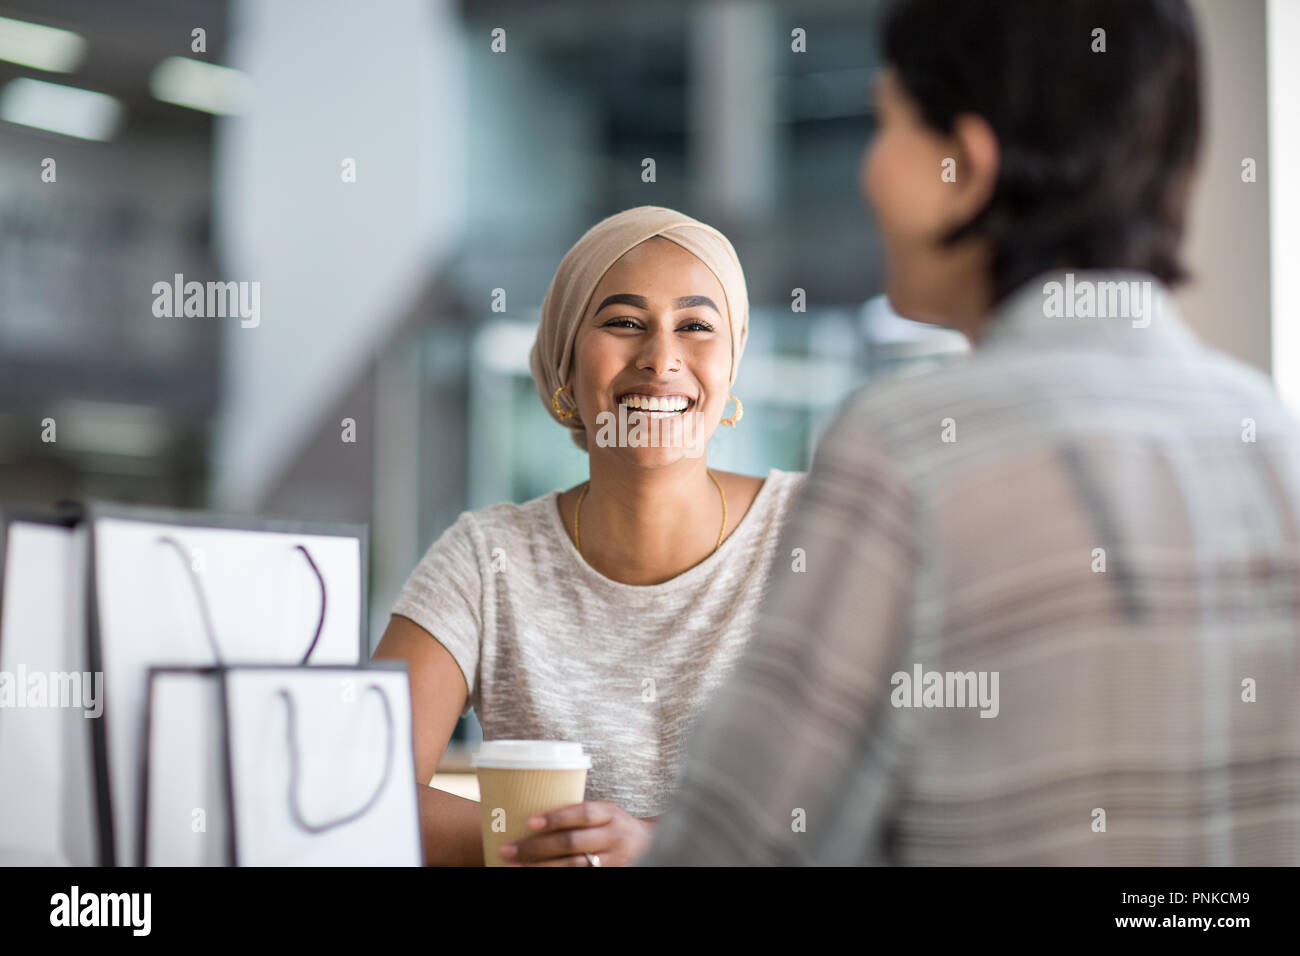 Female Muslim friends having coffee together in a shopping mall Stock Photo